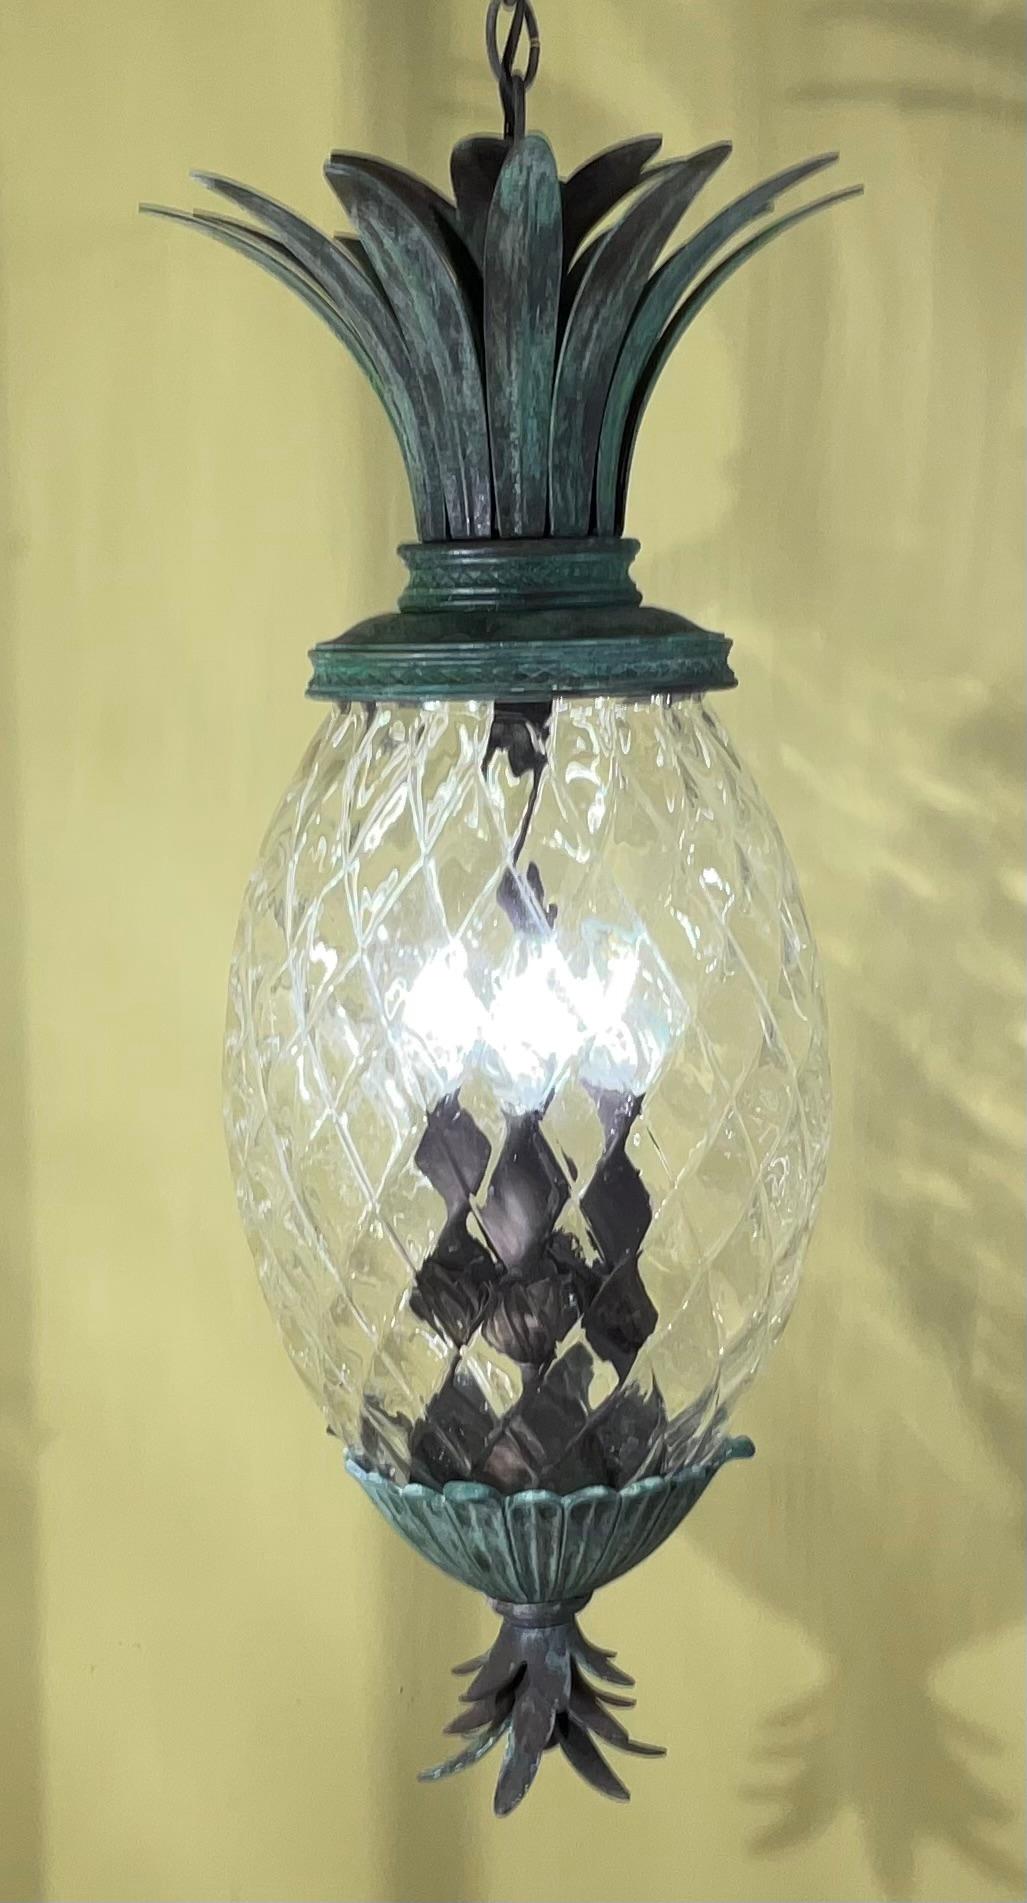 Beautiful single pineapple hanging light , made of bronze and solid brass with four  60/watt light great patina , decorative for indoor or outdoor.
Ready to use.
Original canopy included.